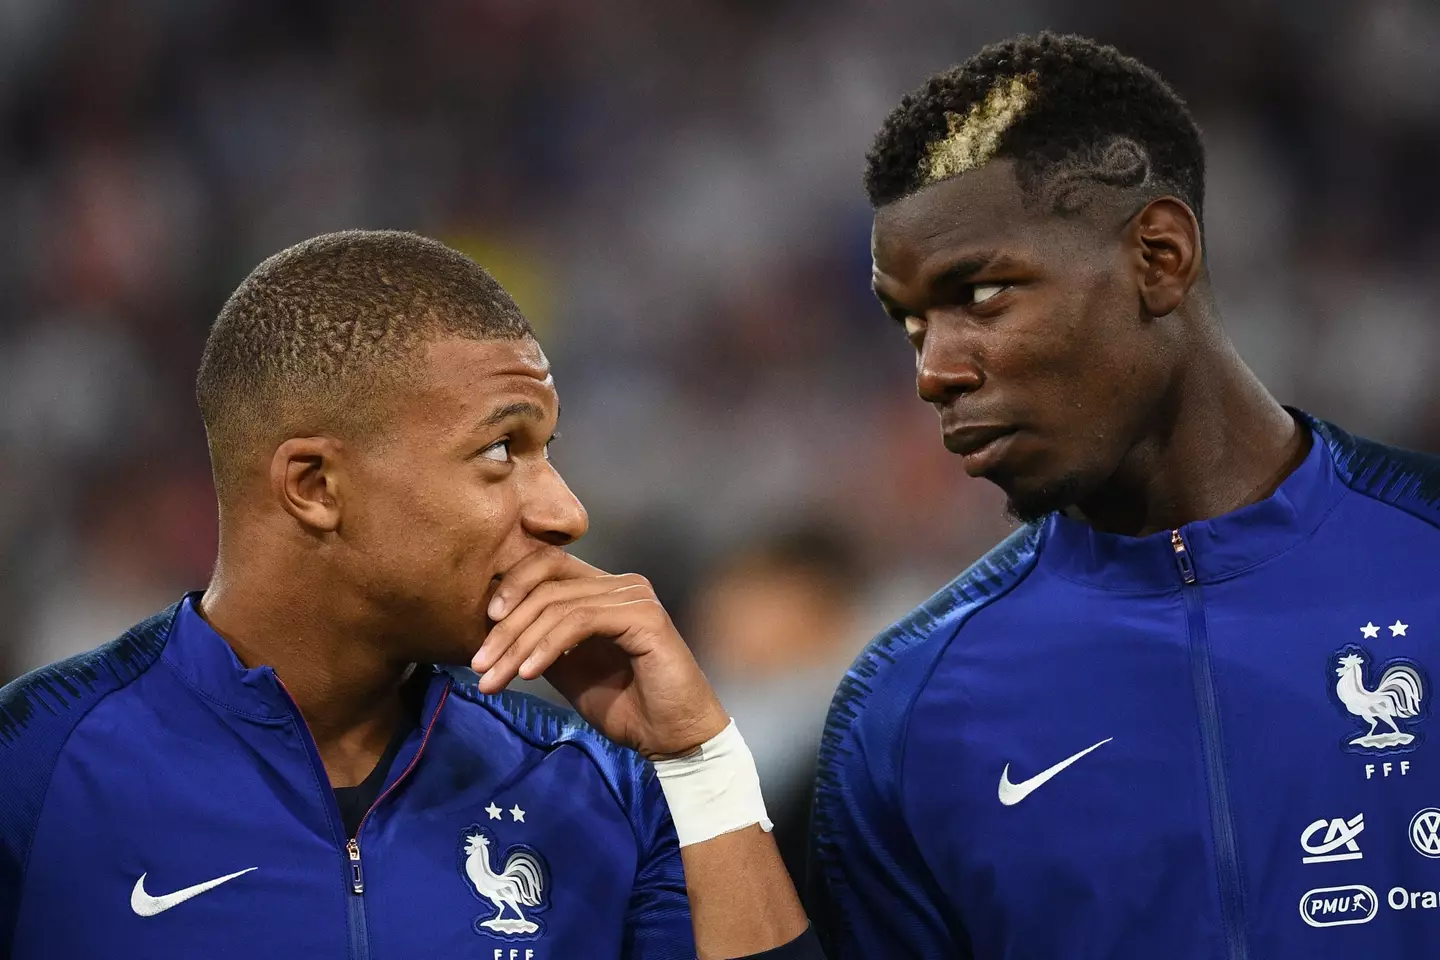 Mbappe snubbed former teammate Pogba.